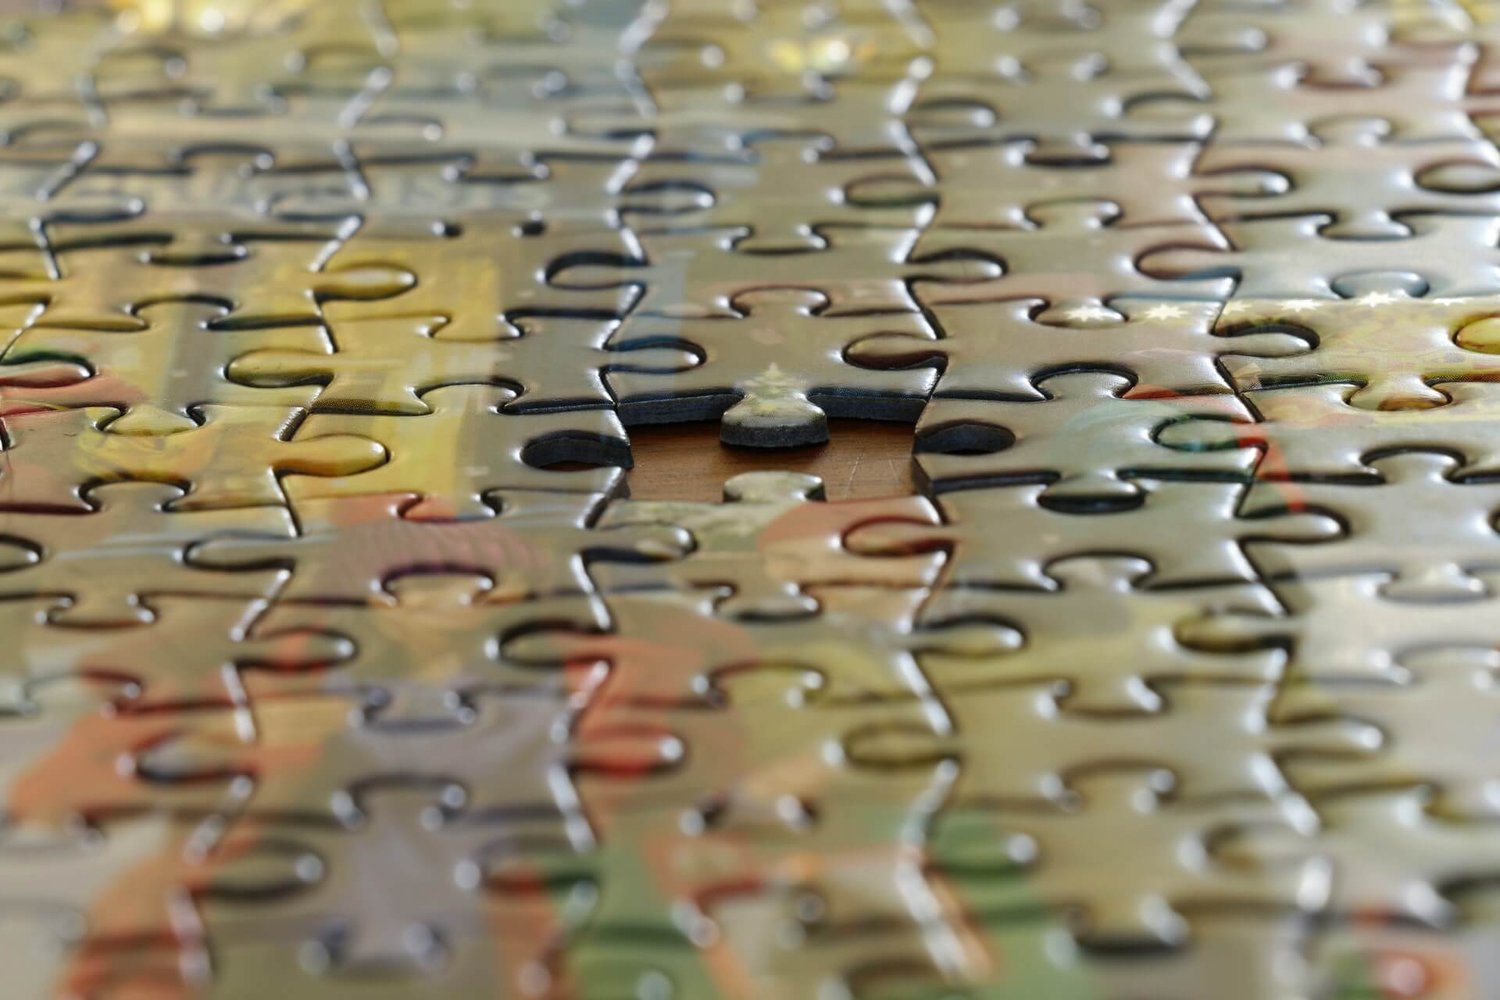 Image shows a multi-colored jigsaw puzzle with a missing piece in the center